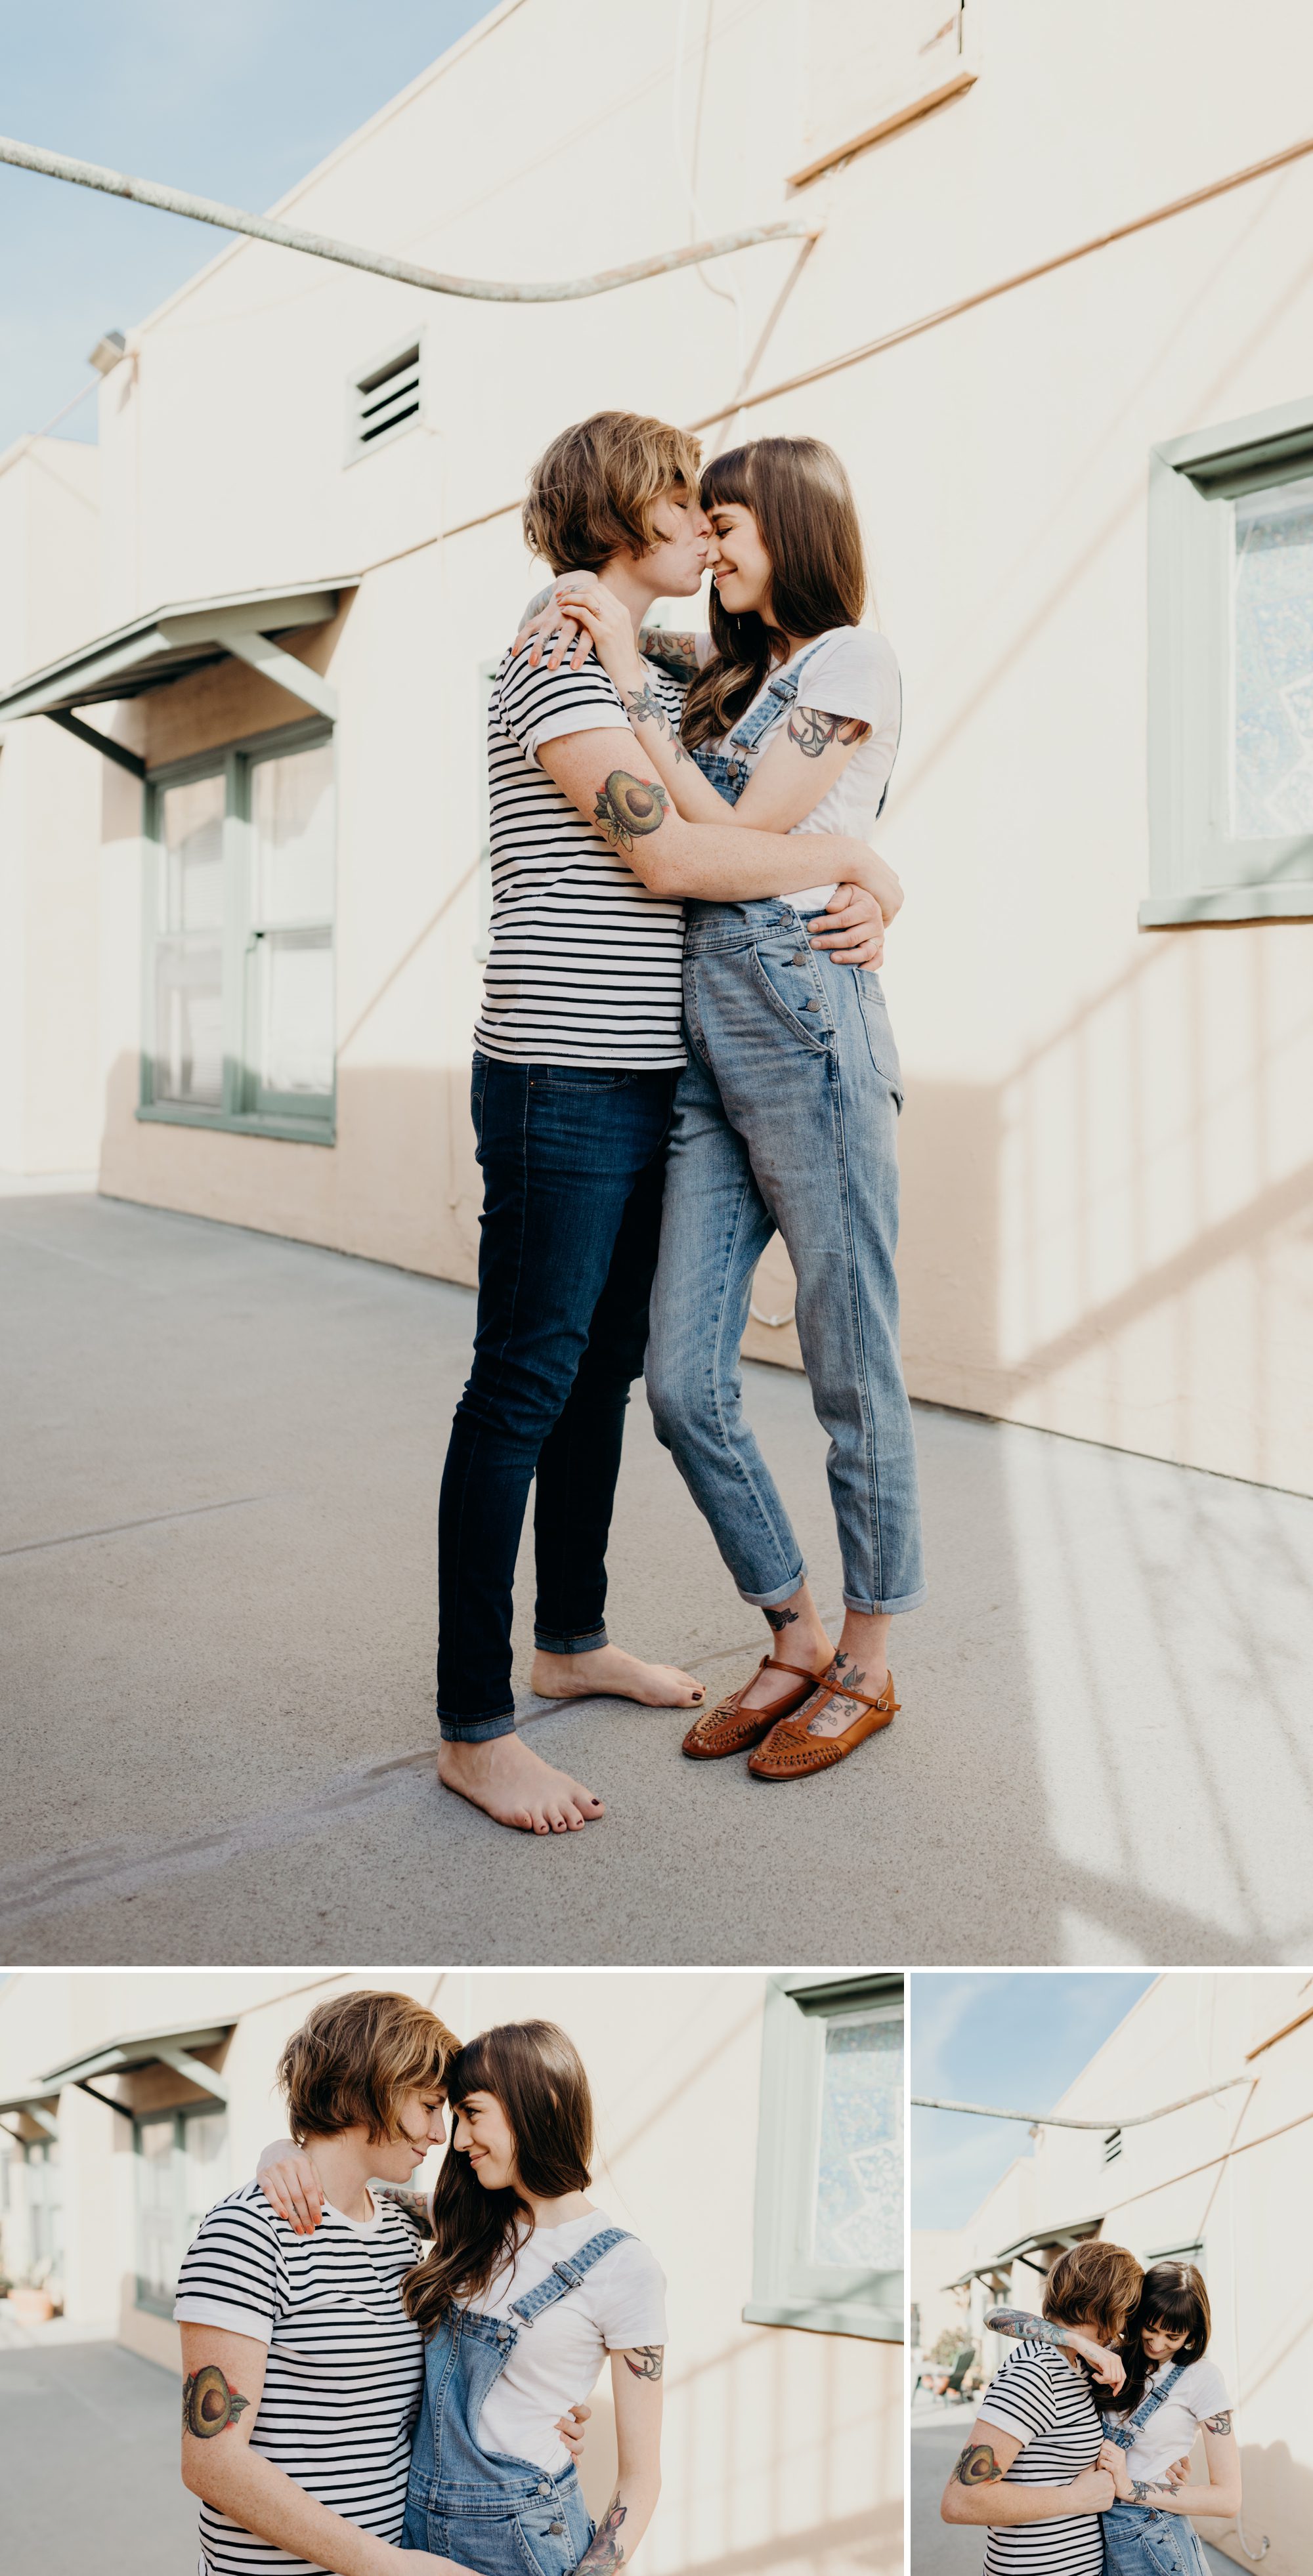 So much love between these two ladies during their portrait session! By North Park San Diego engagement photographer Briana Morrison.